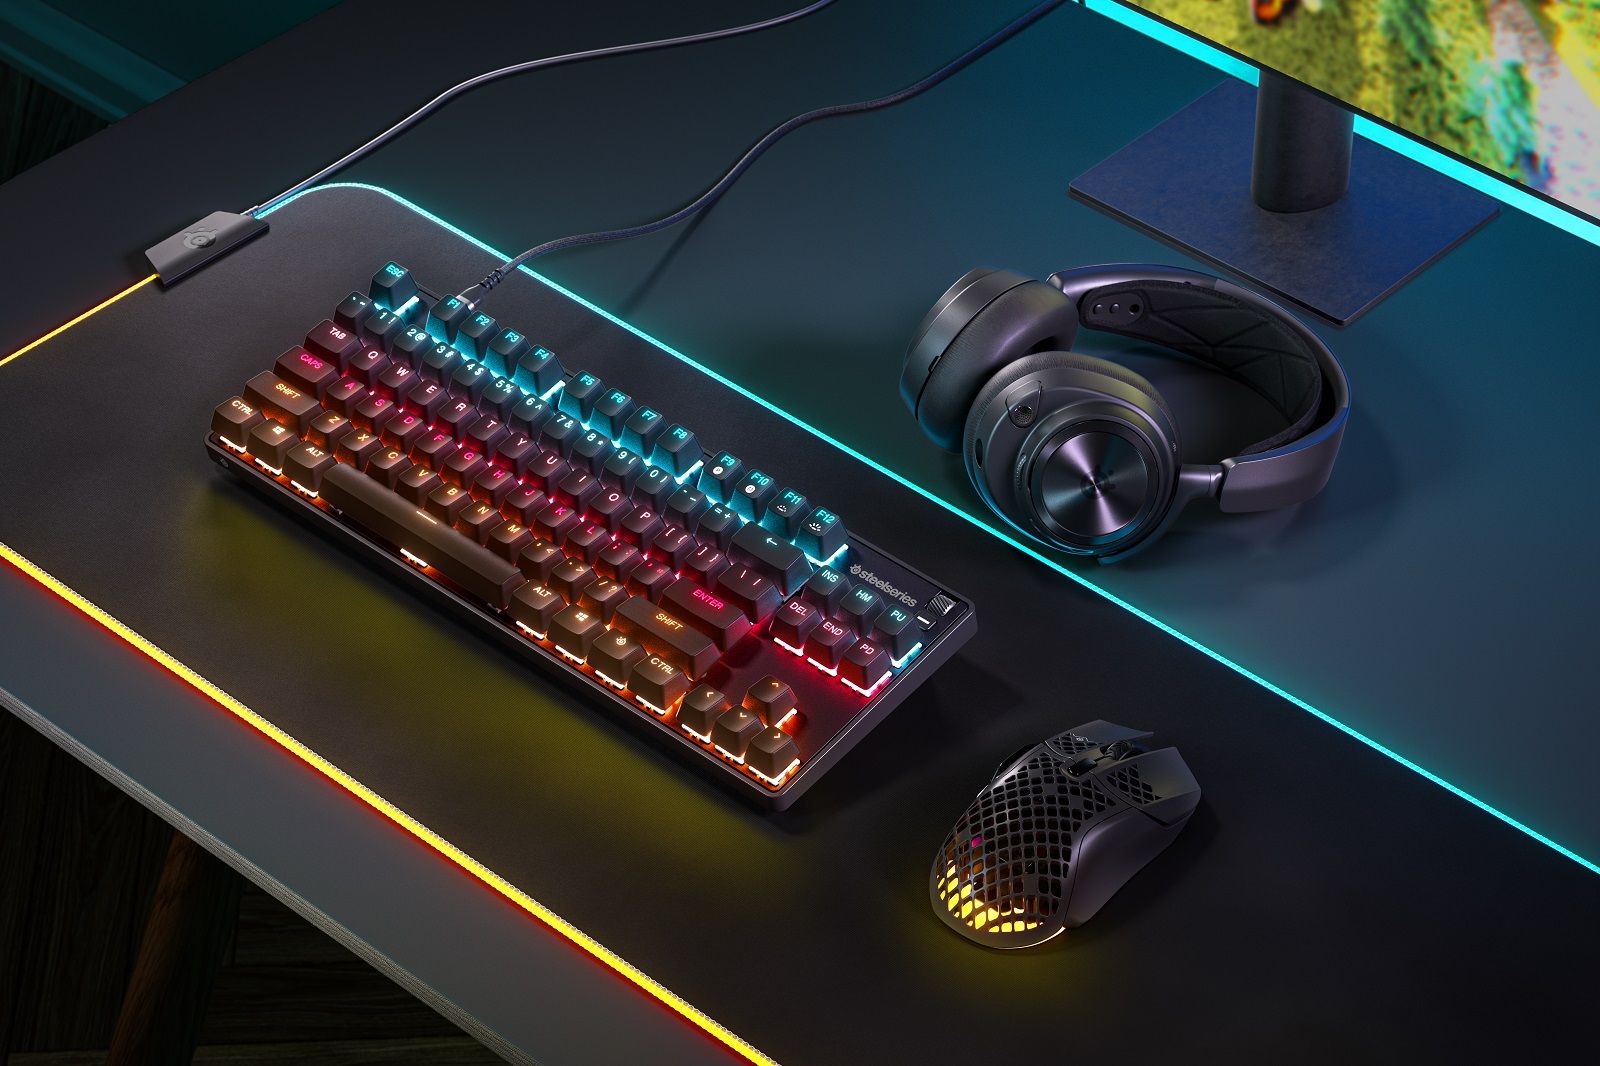 SteelSeries now has two Apex 9 keyboards photo 1